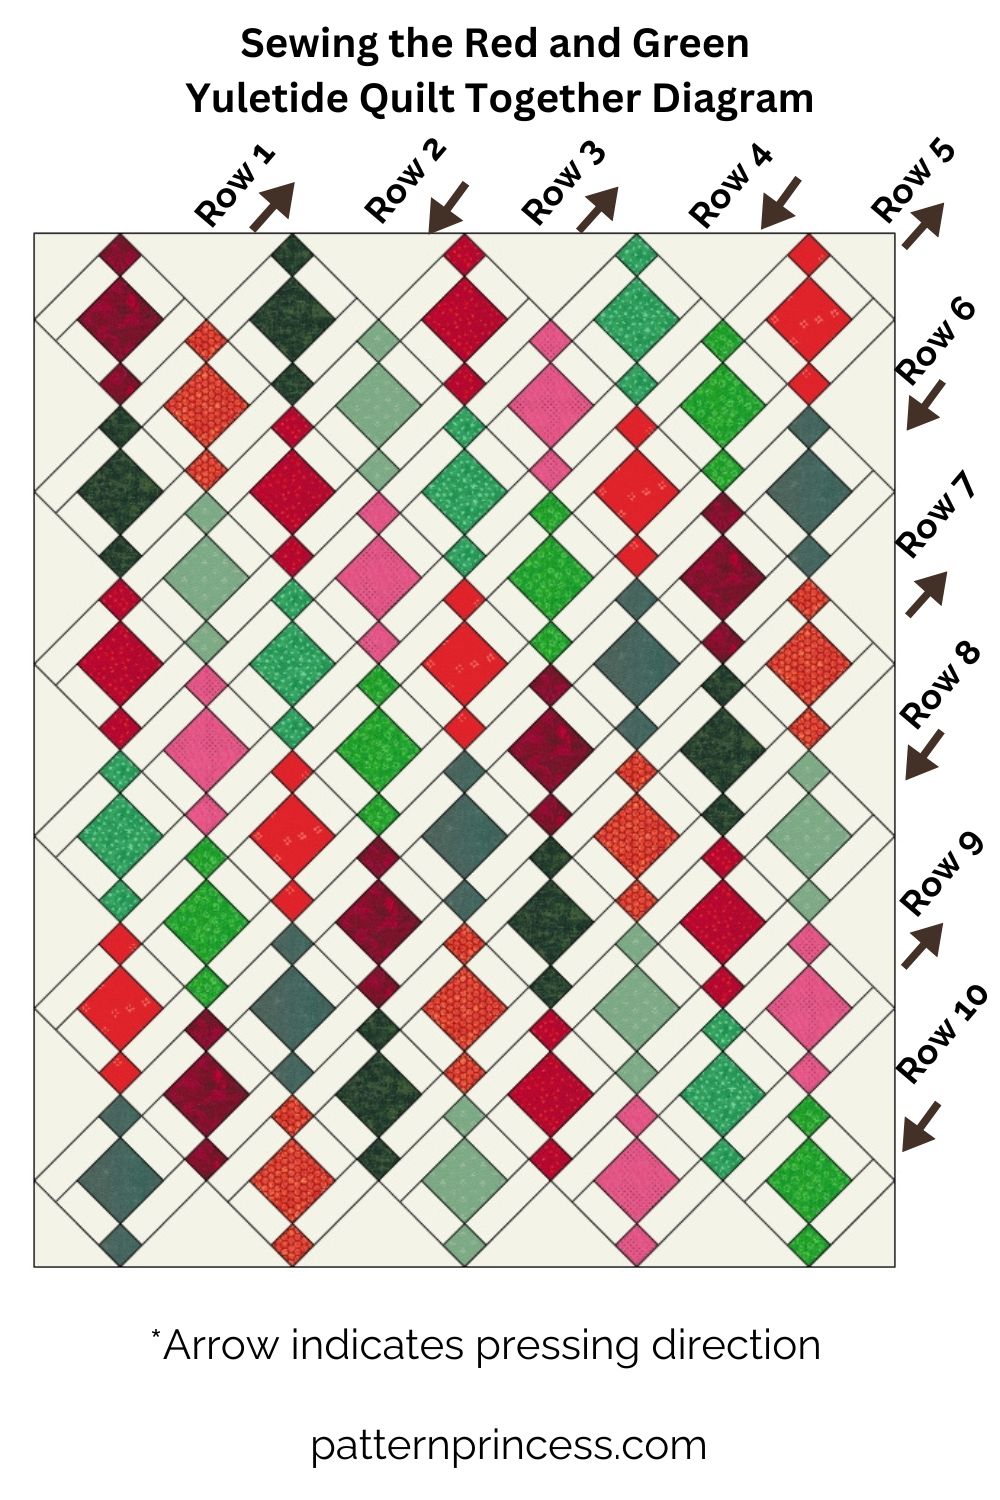 Sewing the Red and Green Yuletide Quilt Together Diagram